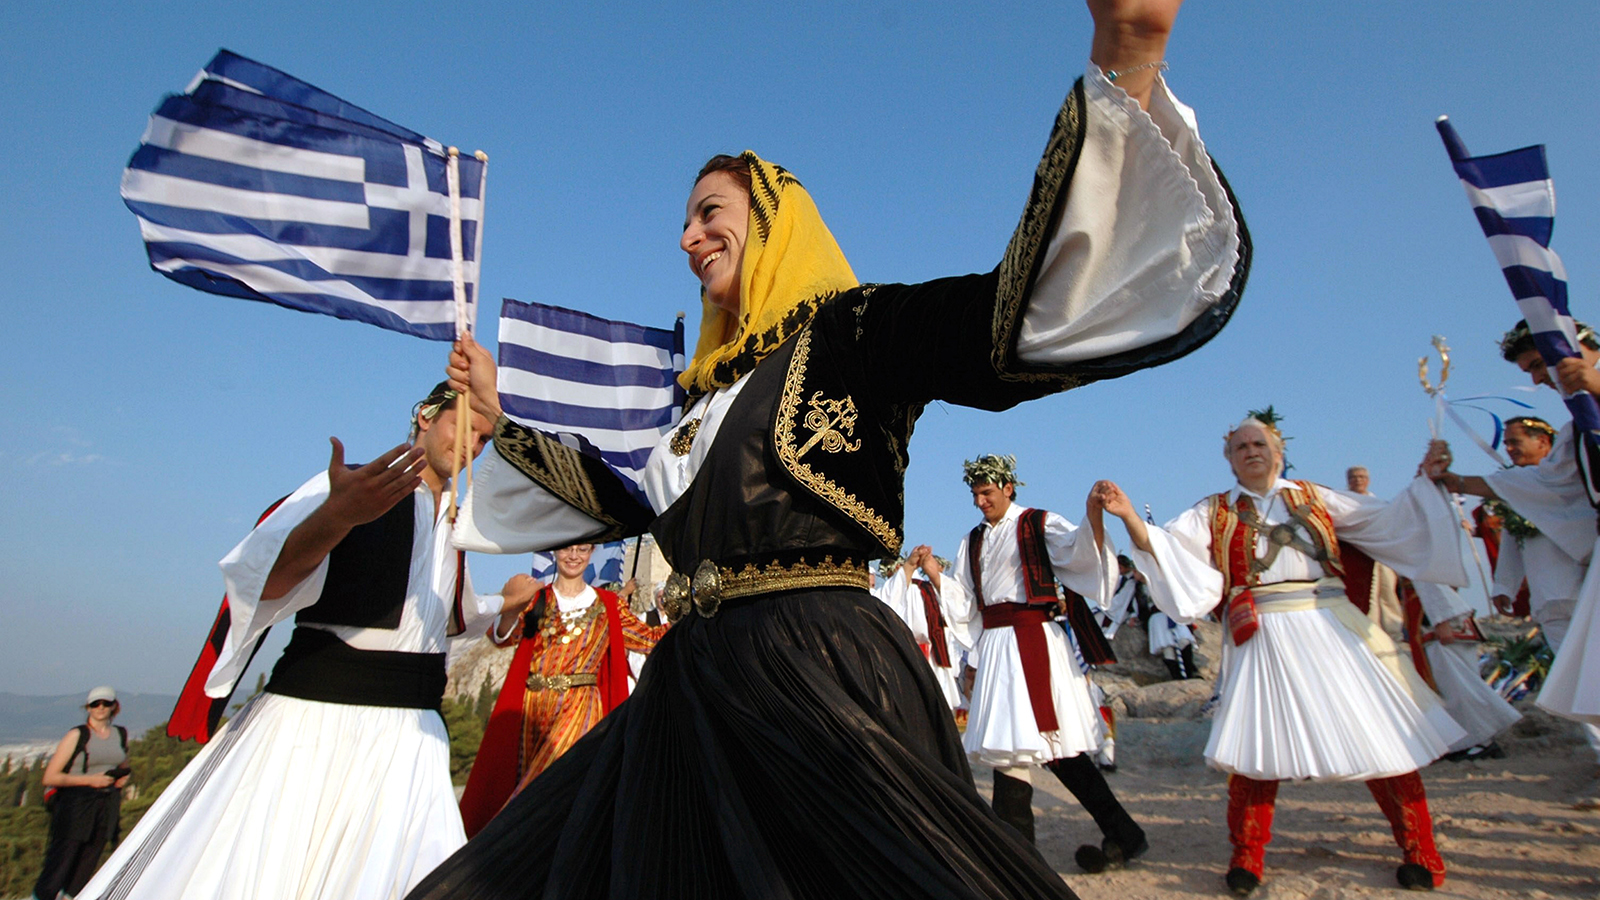 Ceremony inspired by the artist DimitrisTalaganis. Traditional musicians and dancers perform around historical places.
Athens, Attica, Greece
©Maro Kouri/IML Image Group